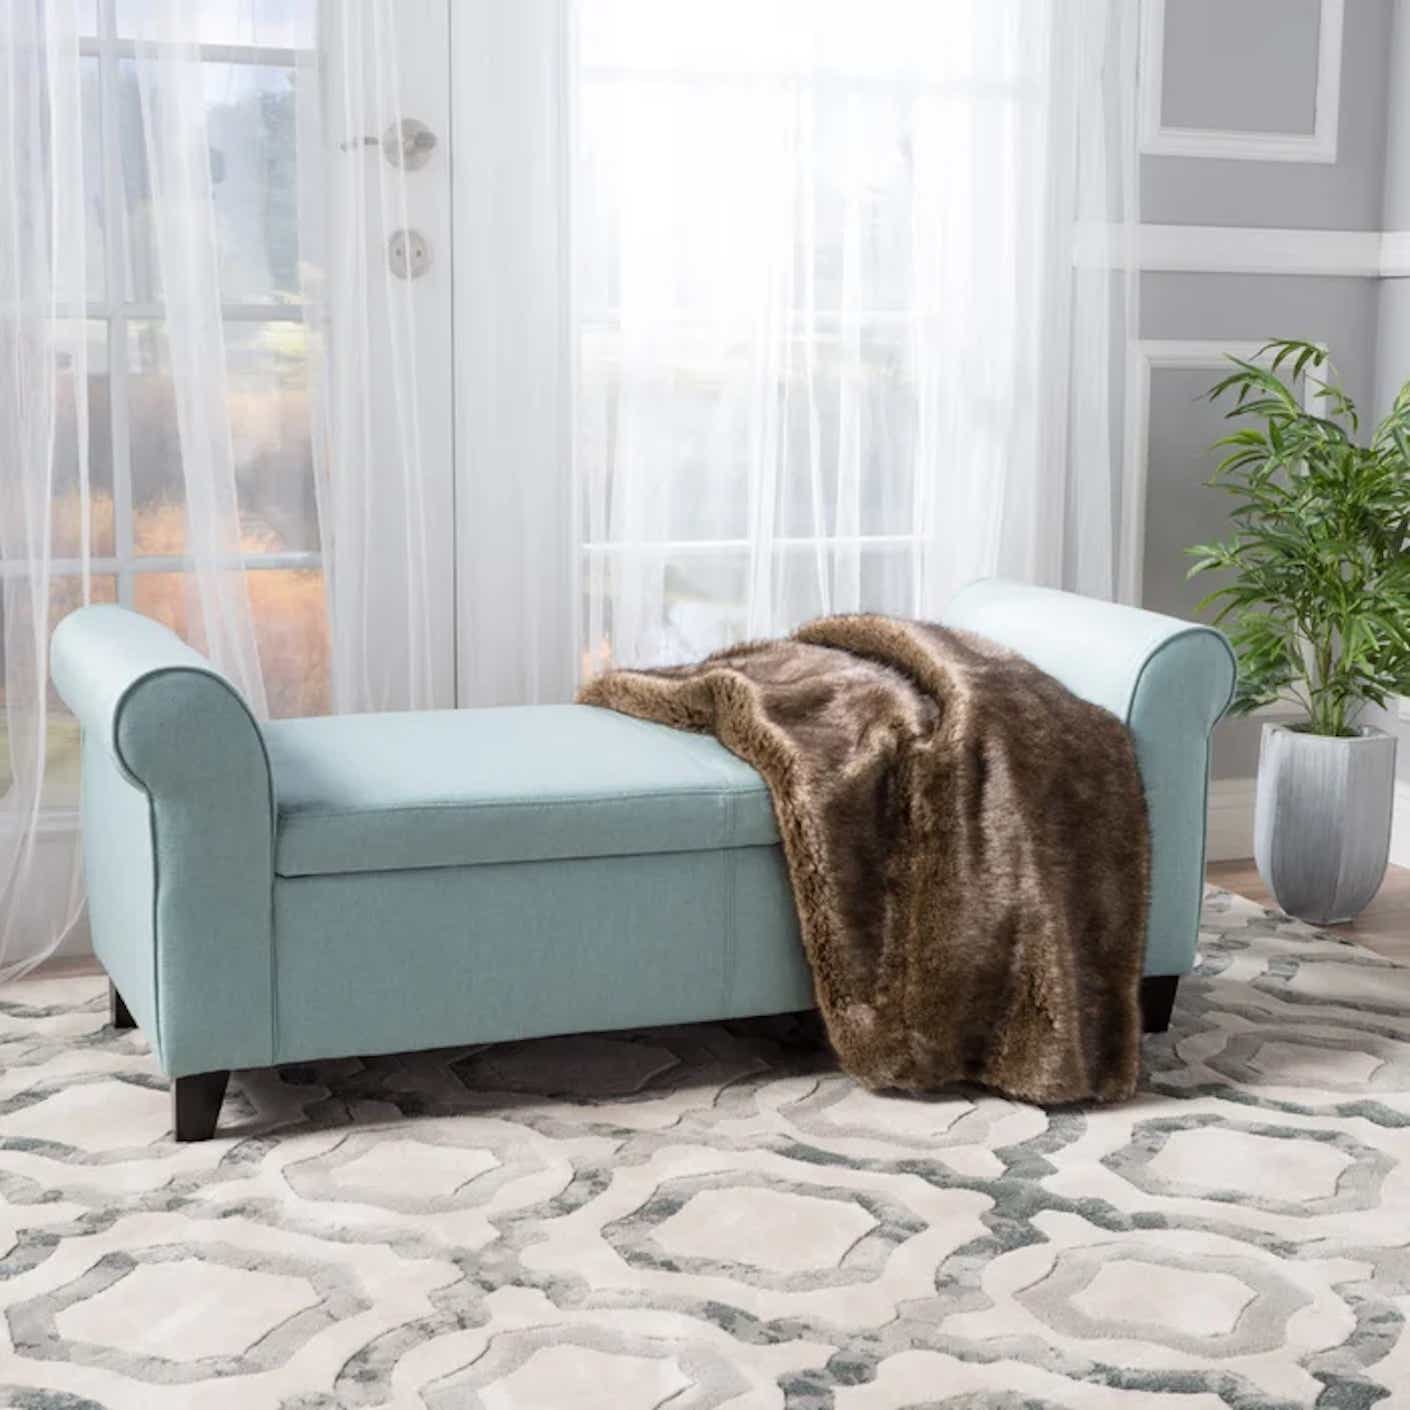 A long, rectangular, baby blue ottoman is pictured looking like a chaise lounge; however, it contains storage space inside.